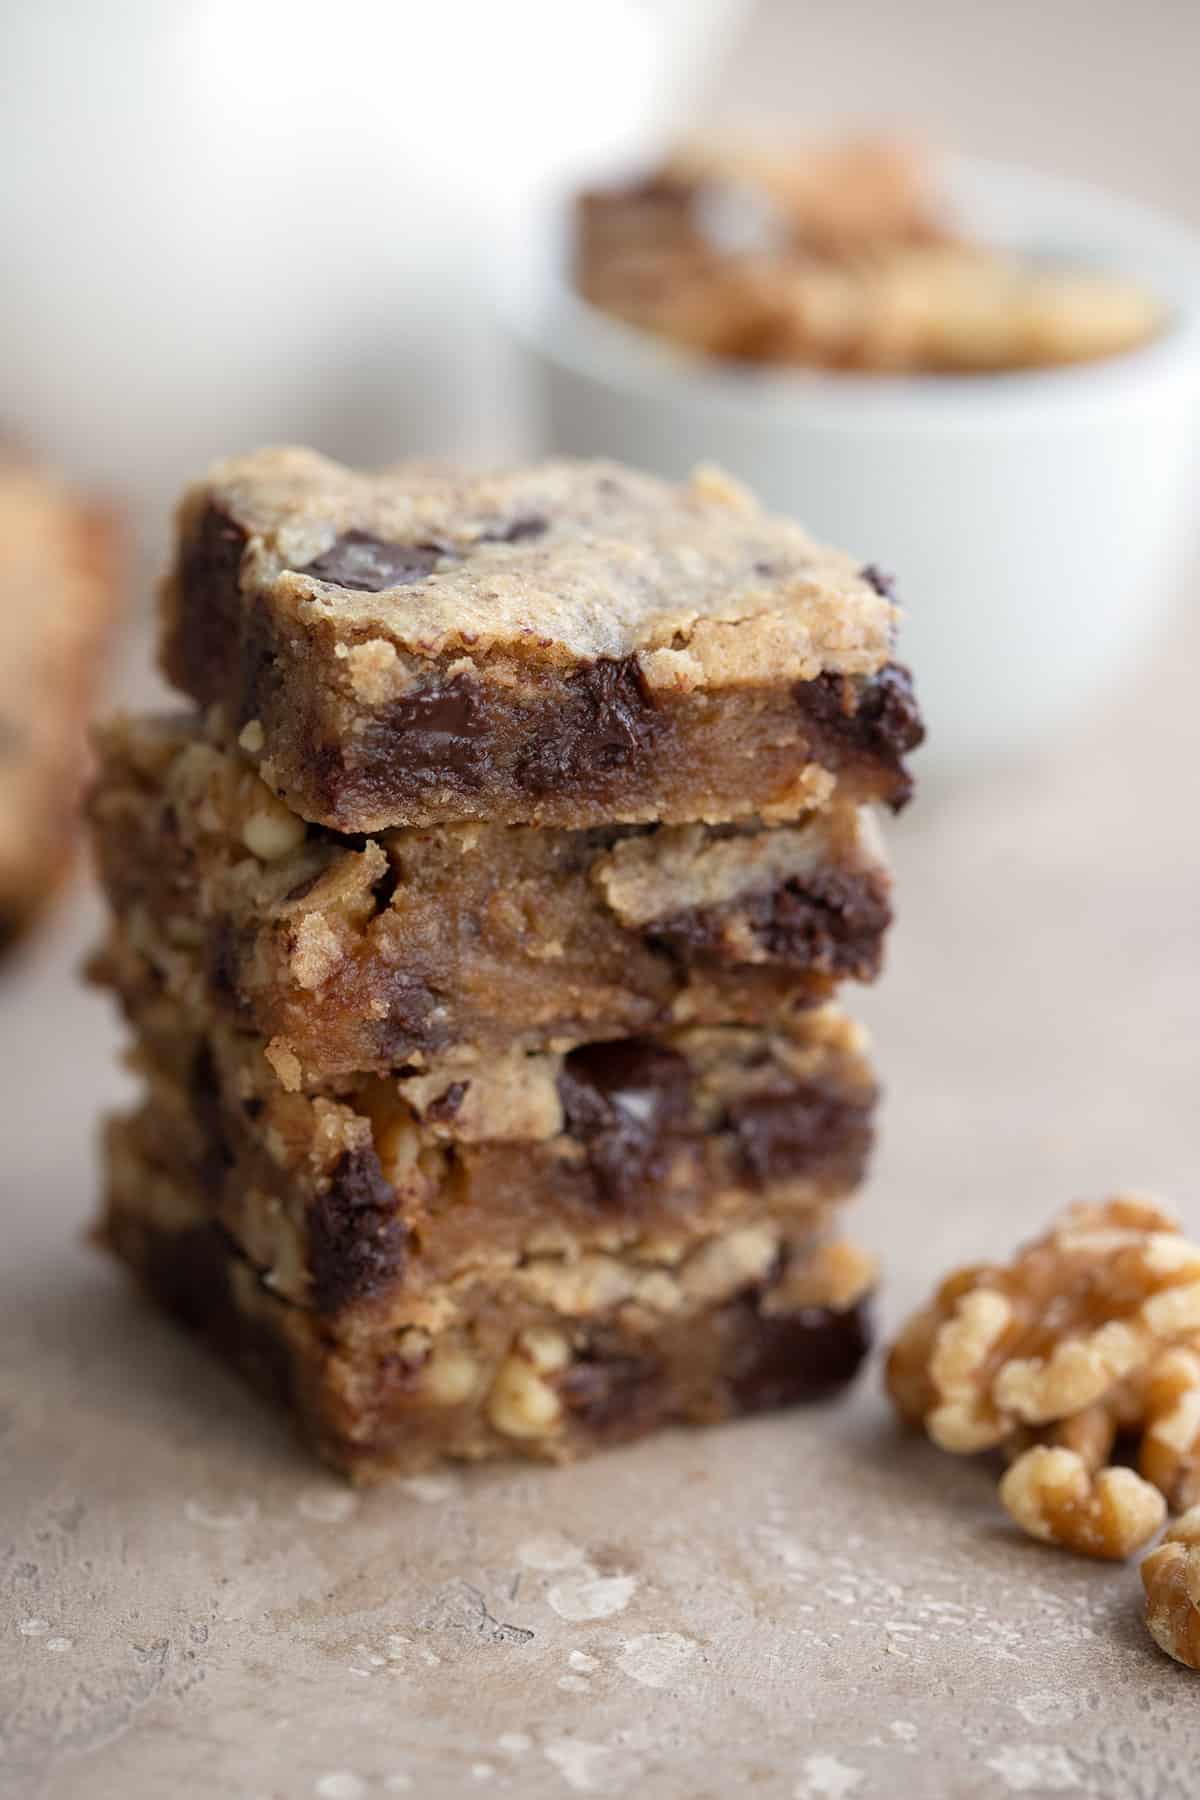 A stack of gooey keto blondies with walnuts.